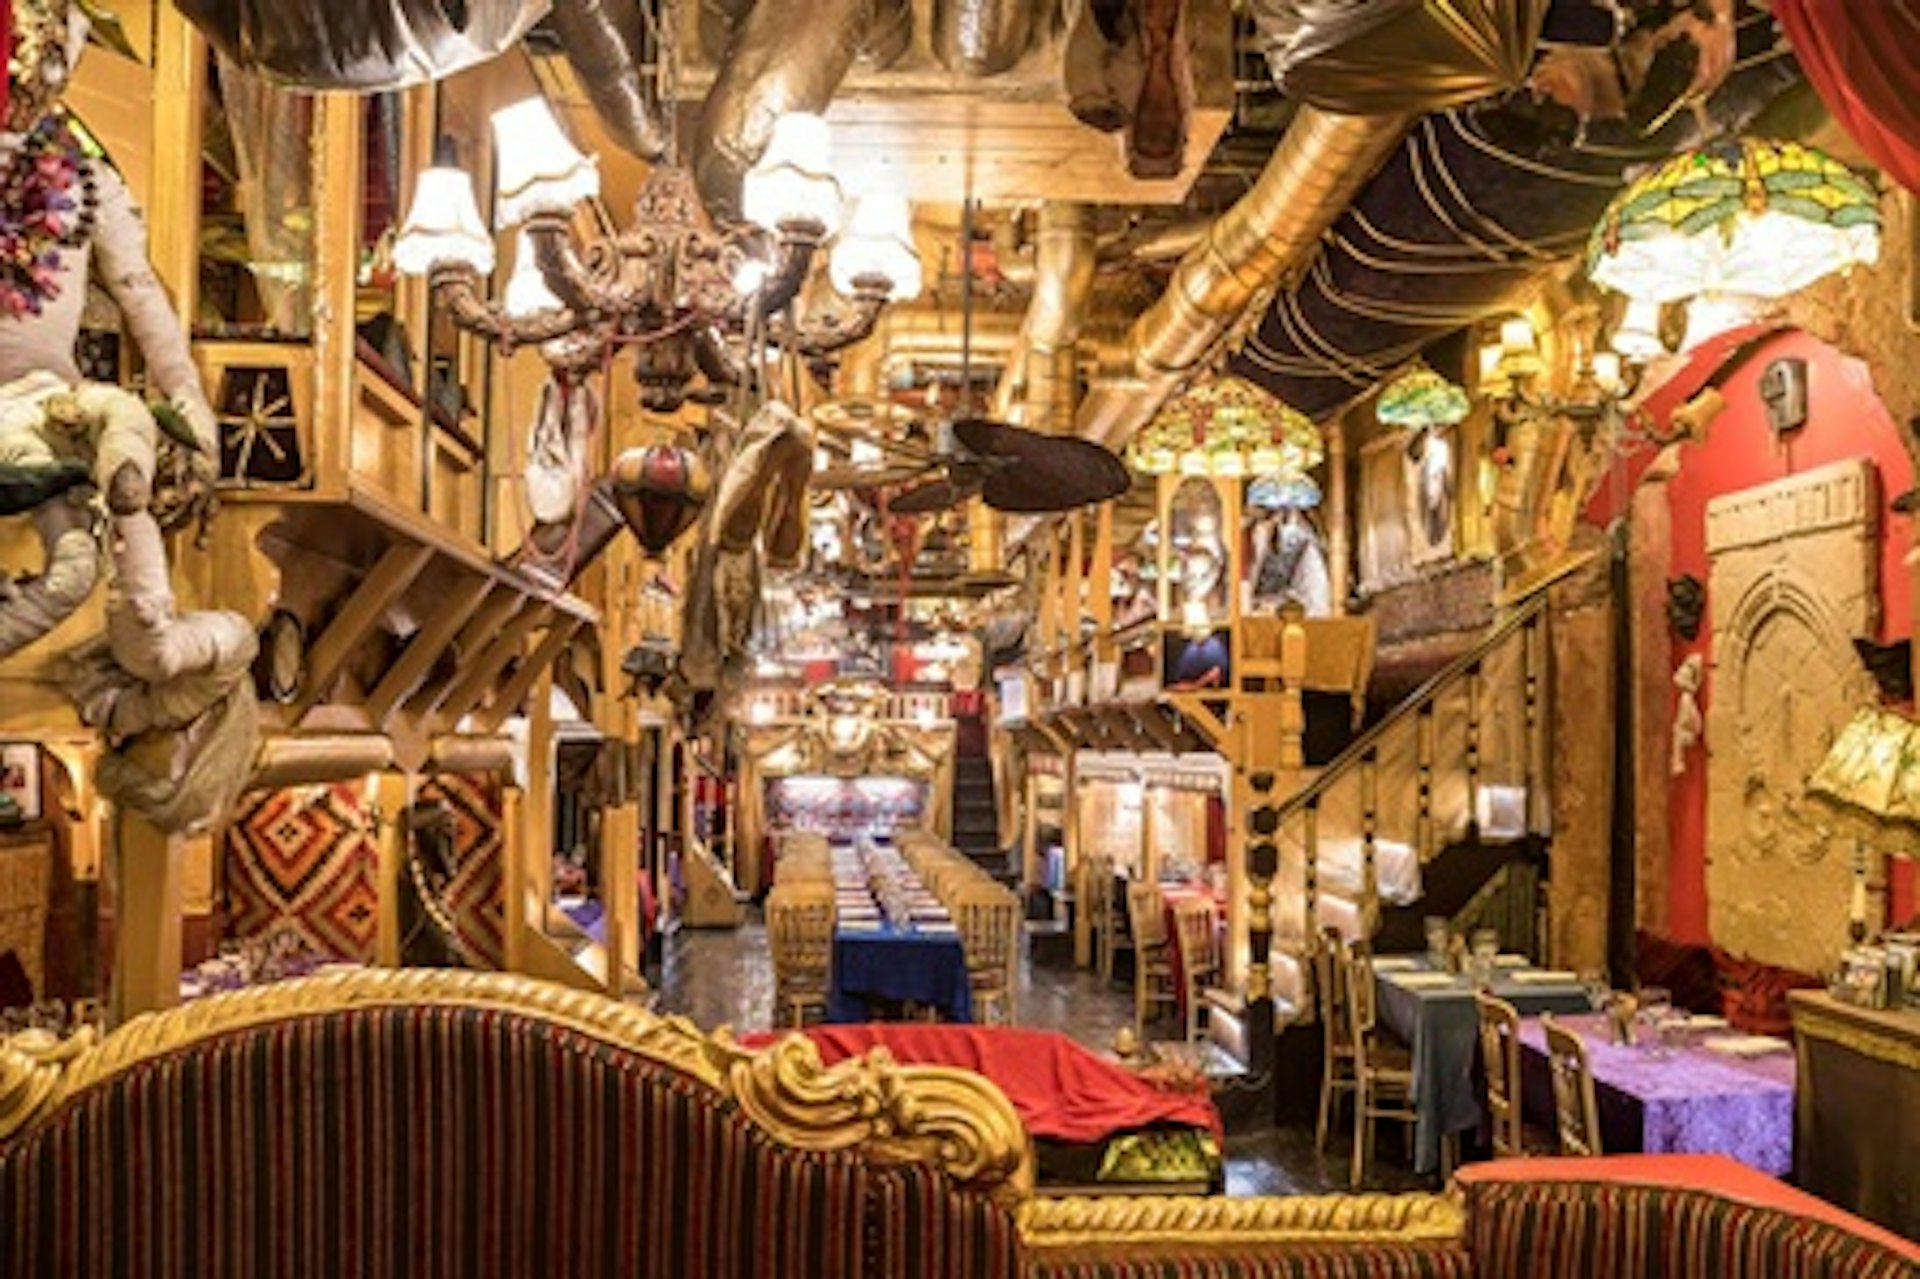 Two Course Dining Experience with Champagne and Live Music for Two at Sarastro Restaurant 4